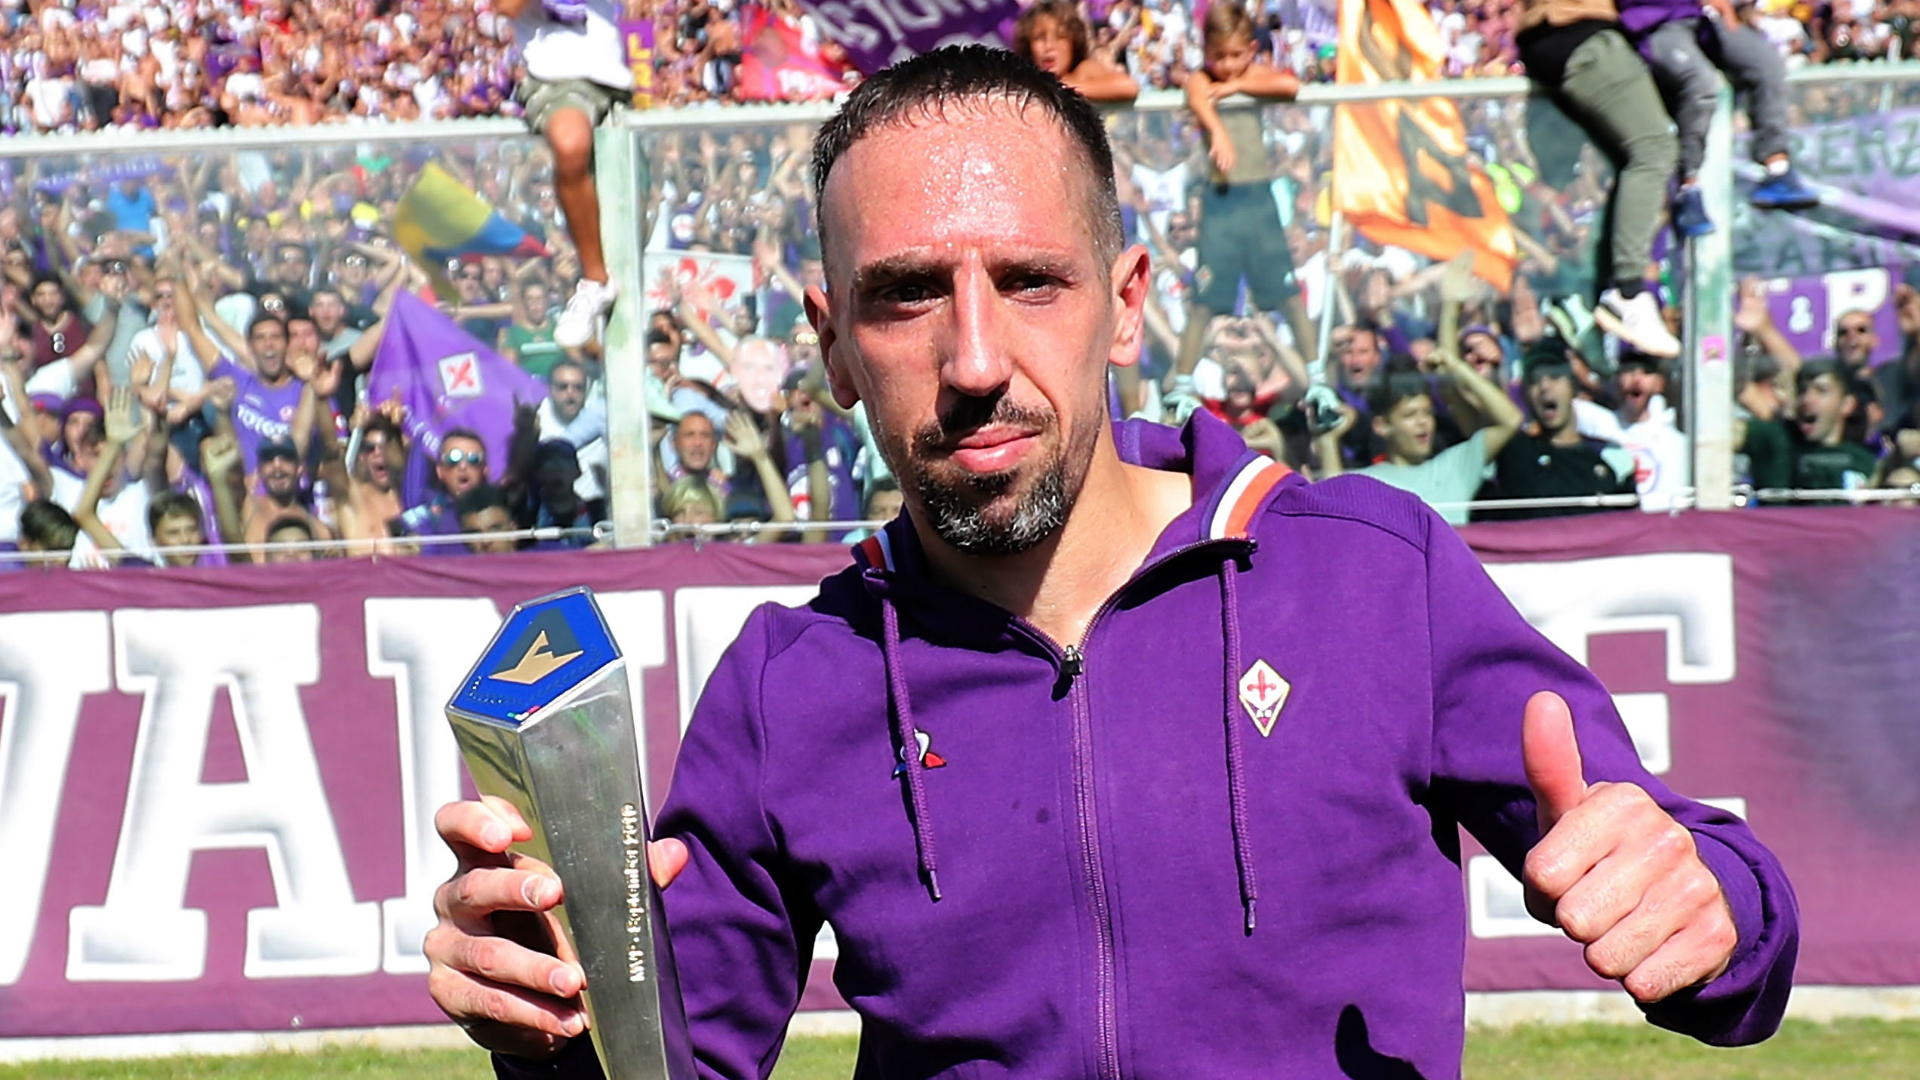 Having been highly impressive in Serie A this season, Franck Ribery could not be happier with his move to Fiorentina.